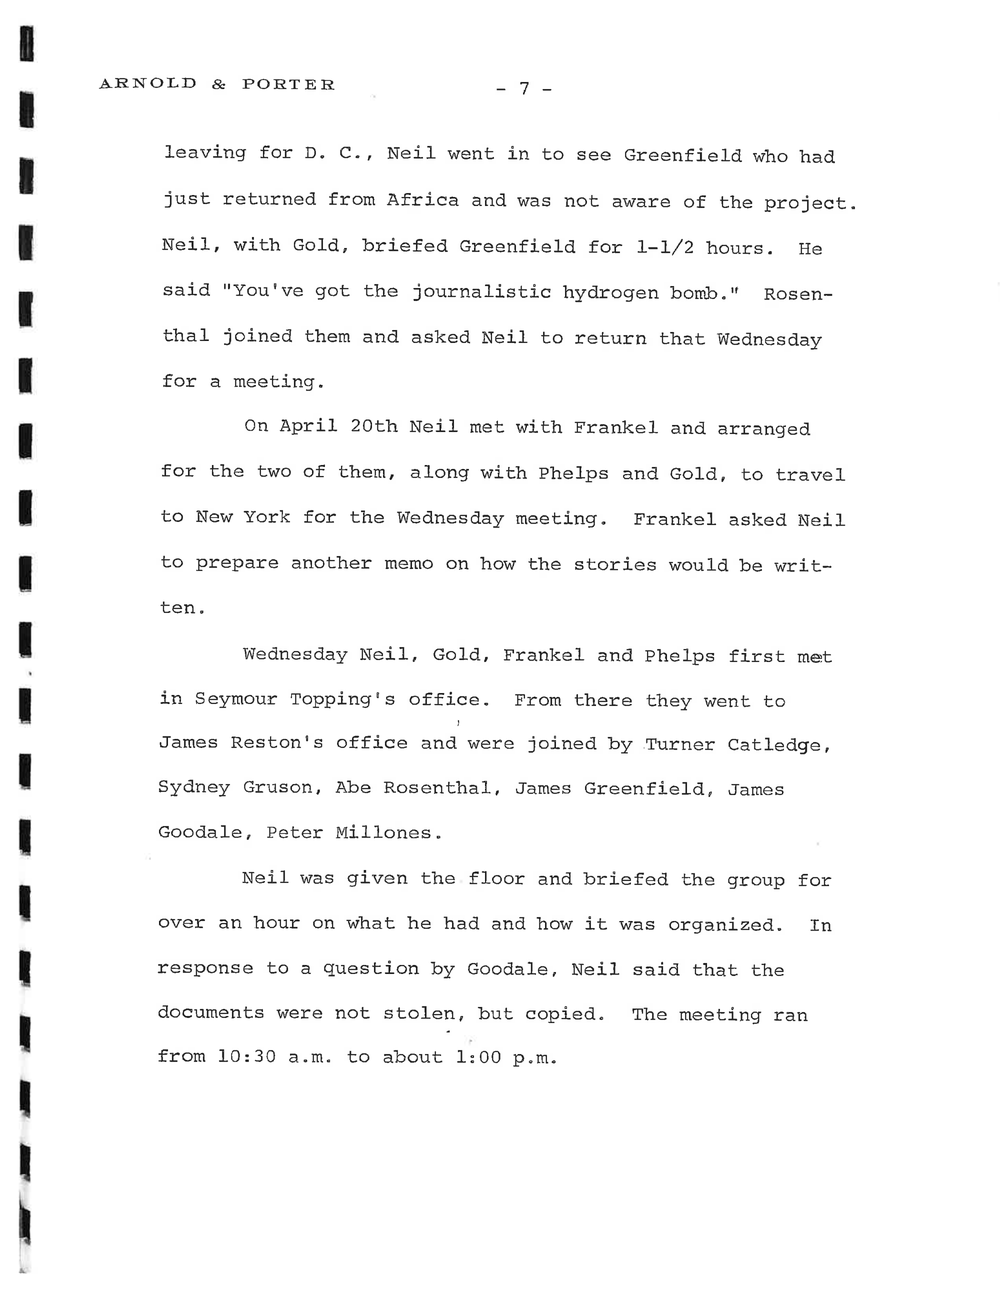 Page 7 from Rogovin Sheehan memo